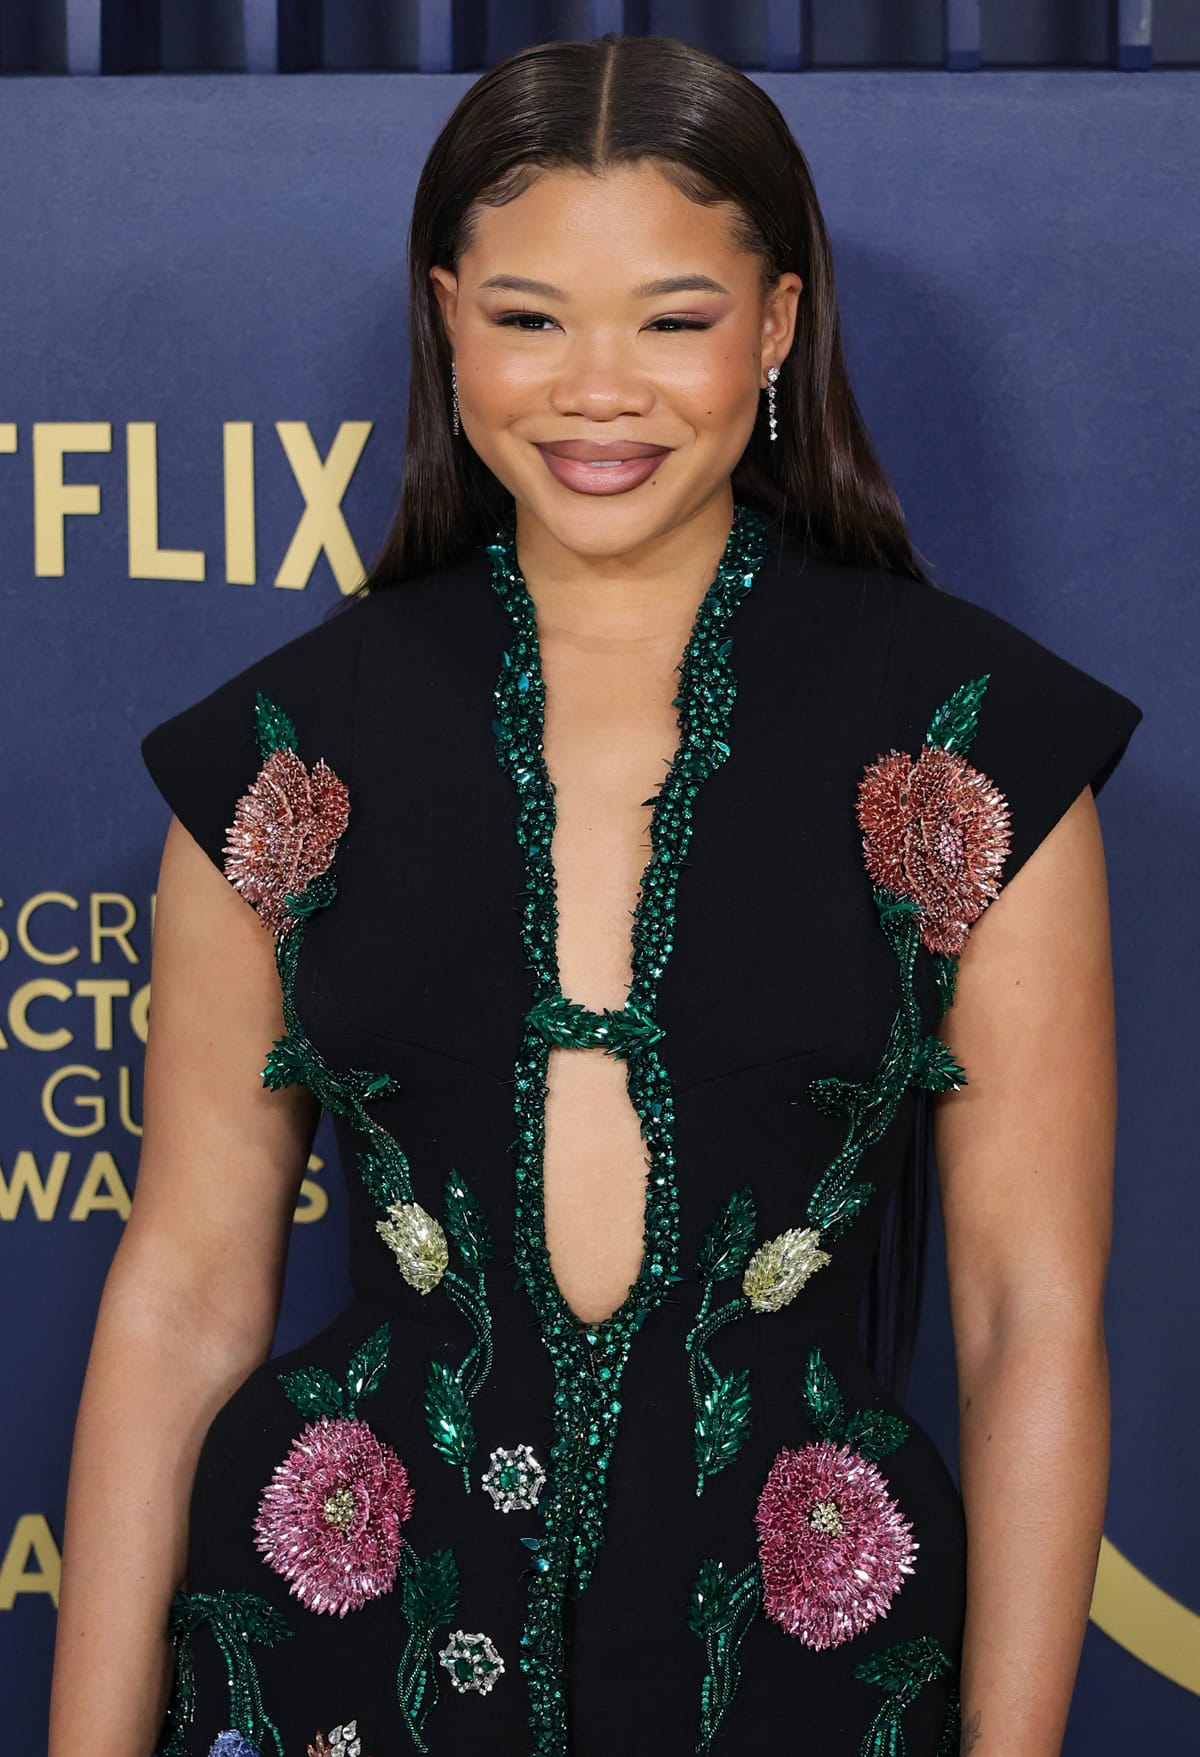 Storm Reid's hair was styled in a sleek middle part, cascading gracefully down her back, which complemented her bold makeup featuring dark smokey eyes and striking mauve lips